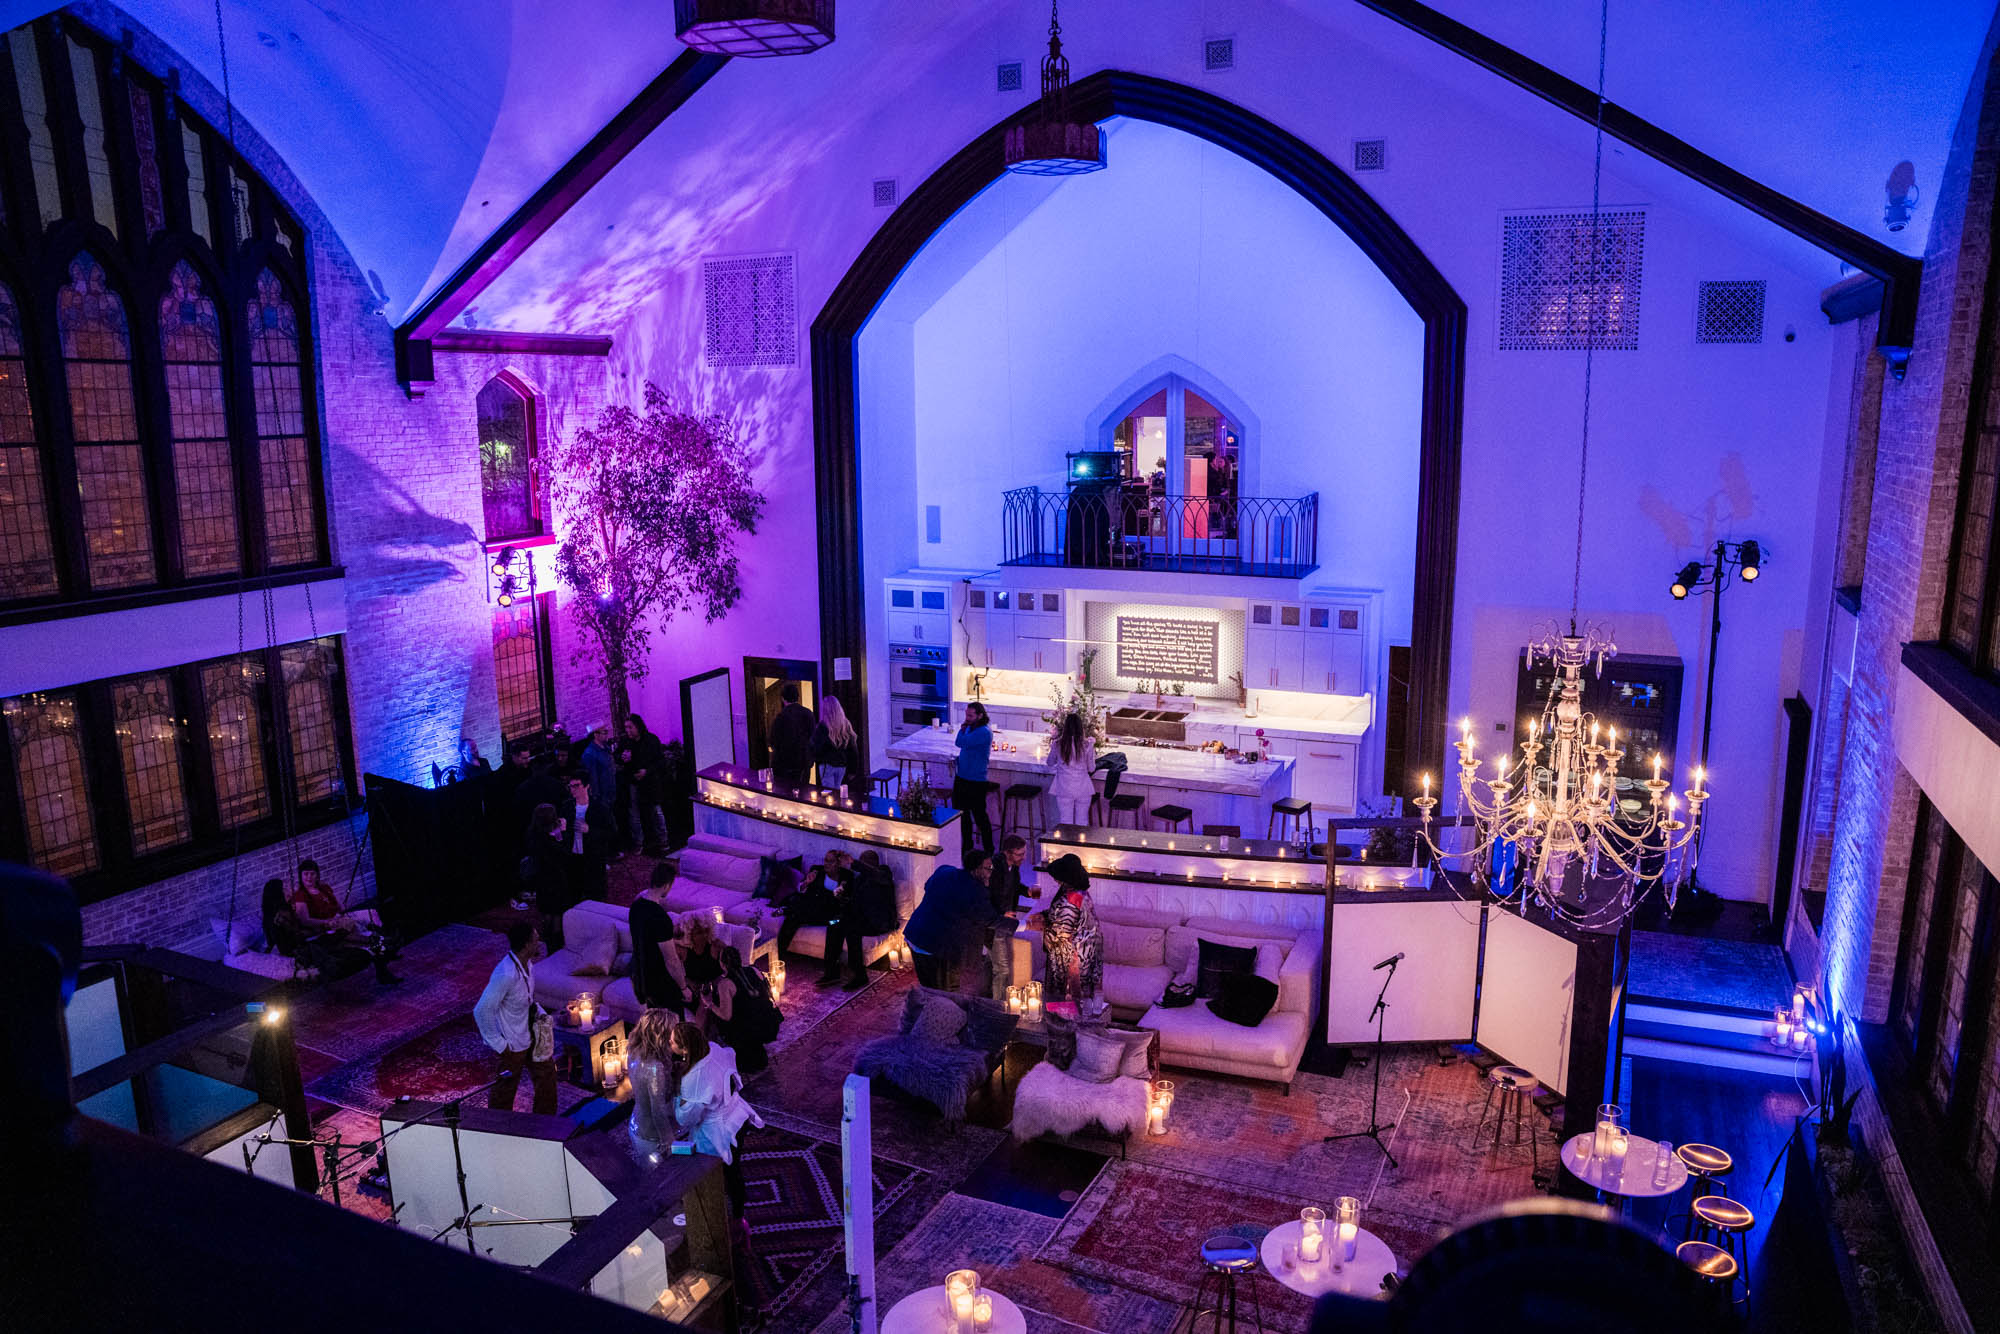 A chapel made to be a lounge and recording studio